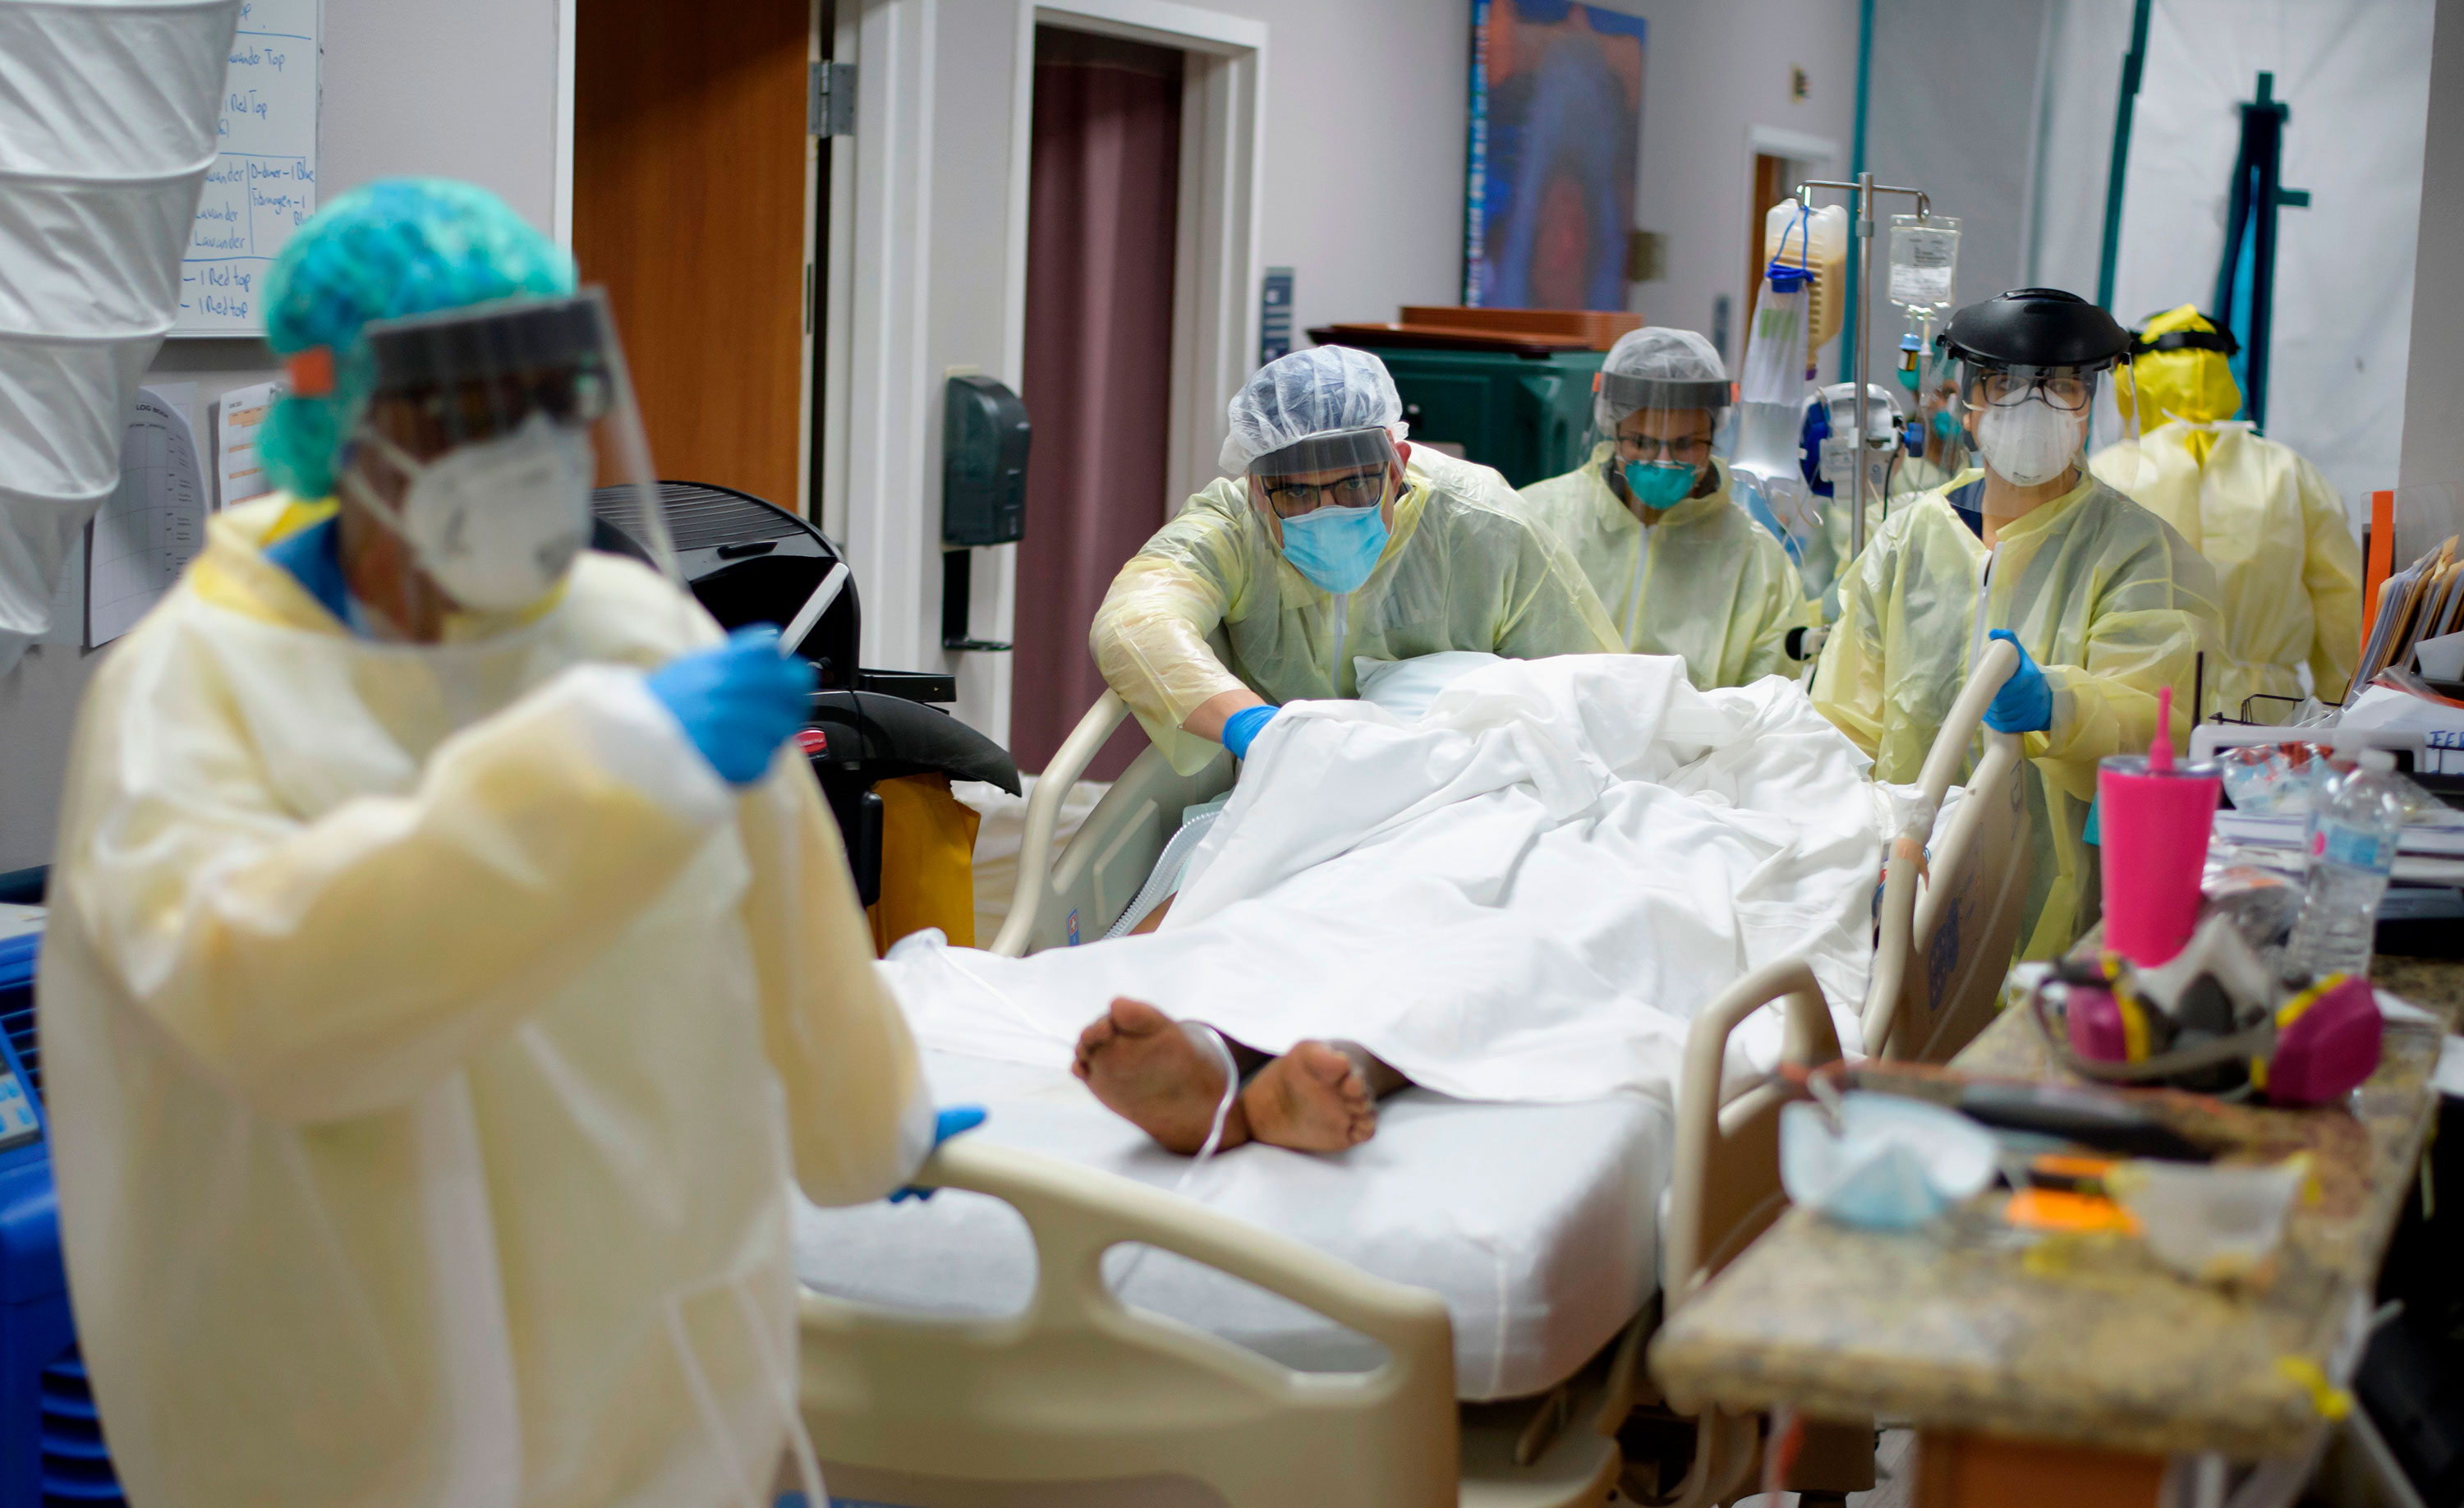 Healthcare workers move a patient in the Covid-19 Unit at United Memorial Medical Center in Houston, Texas, on July 2.